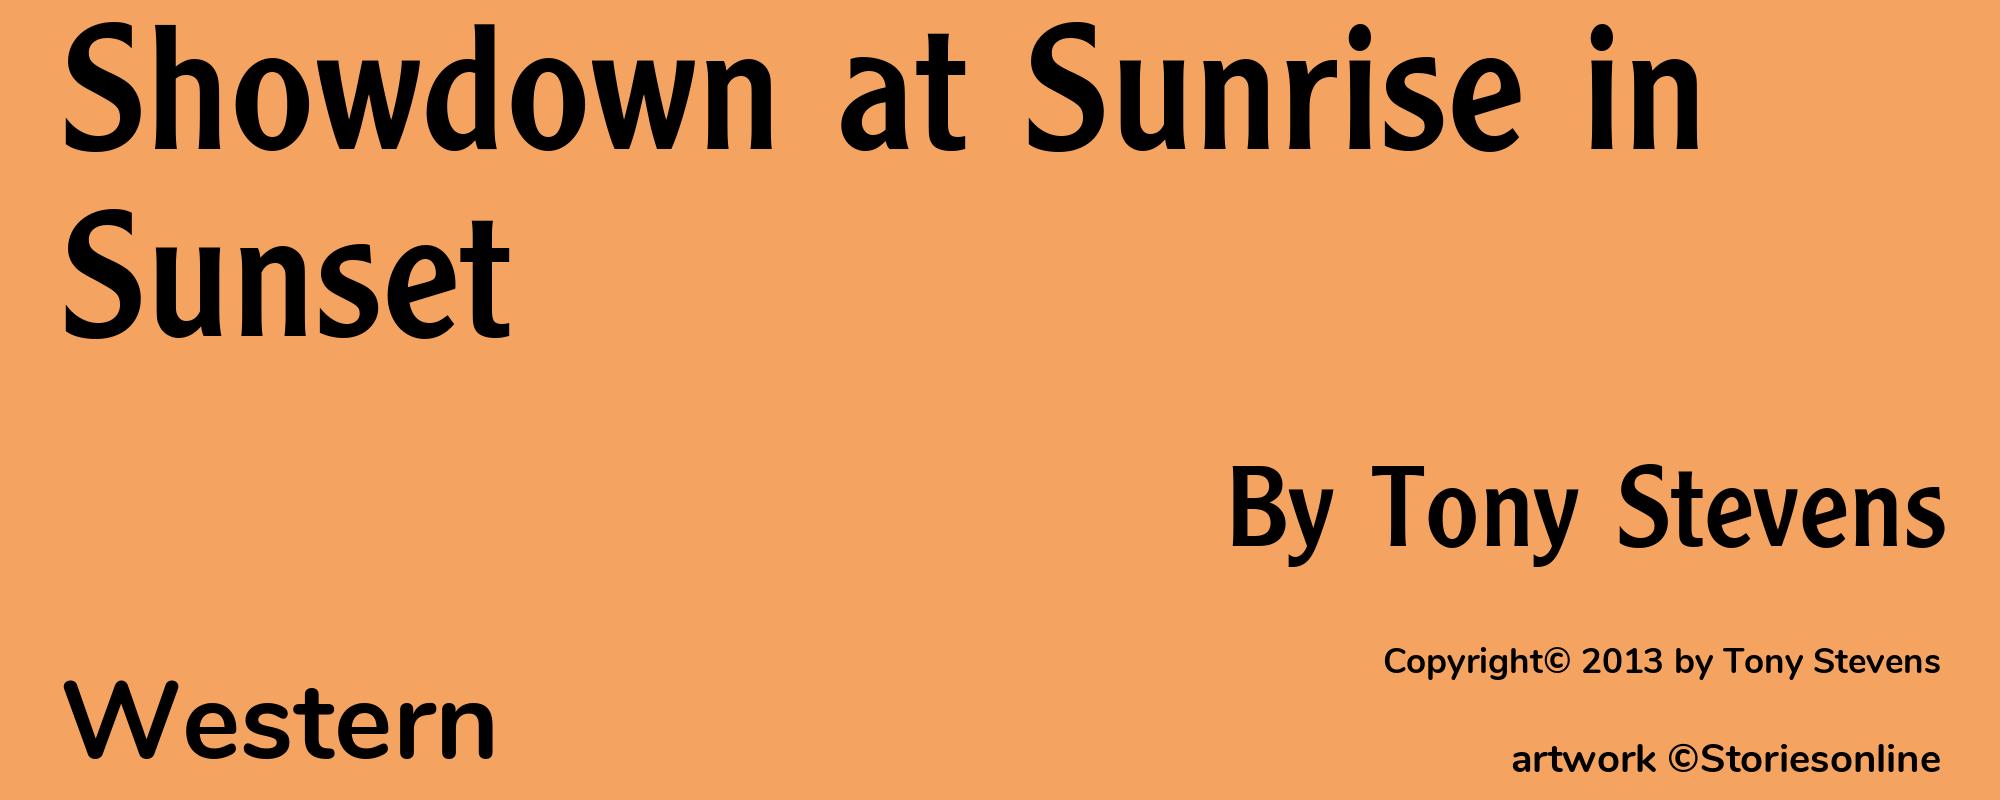 Showdown at Sunrise in Sunset - Cover